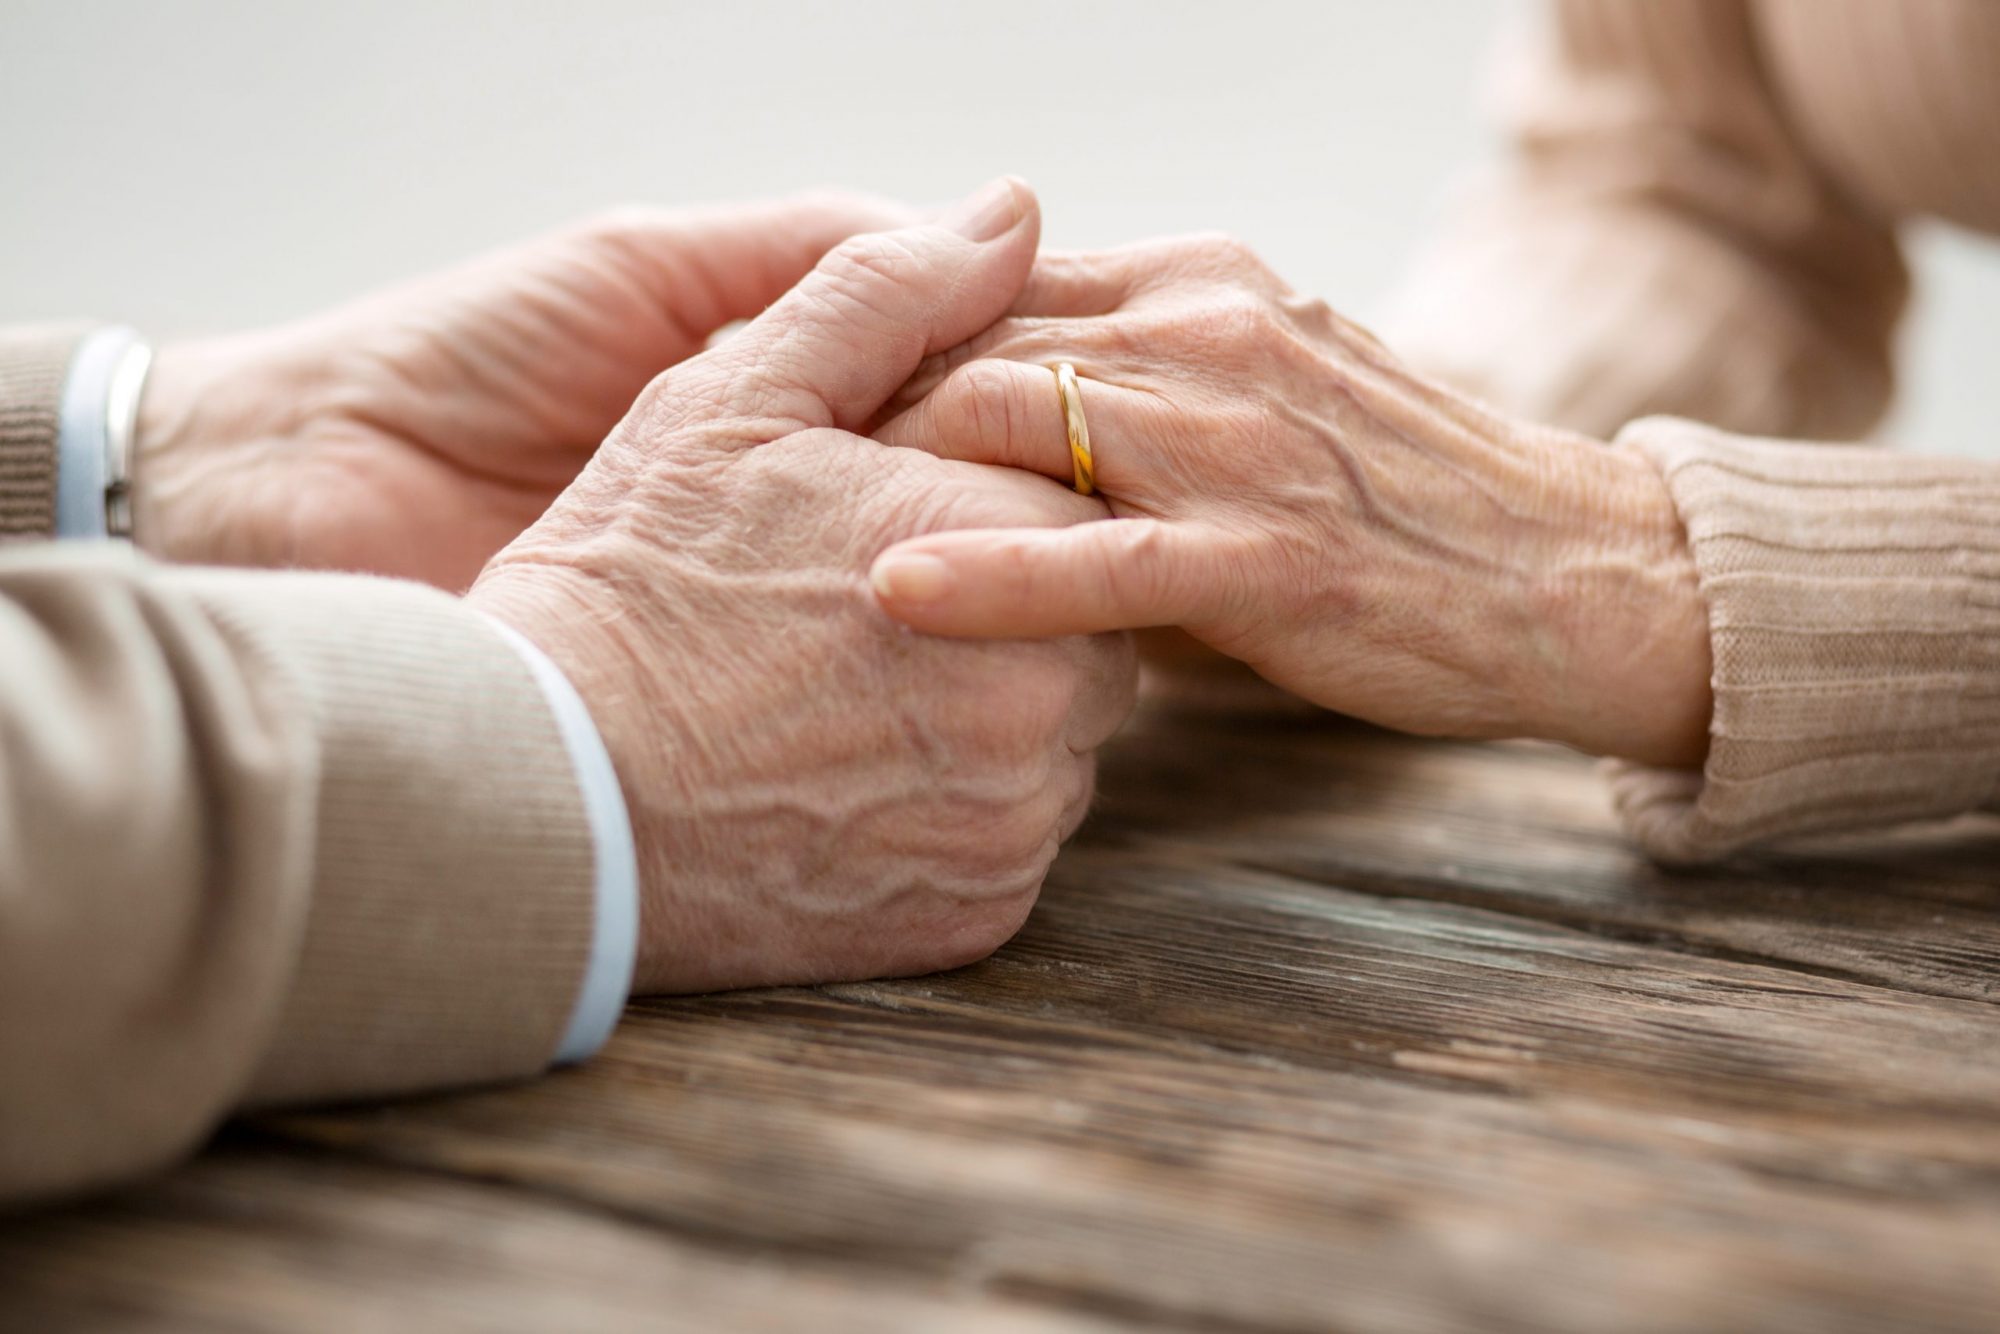 A senior married couple embracing hands, contact our gray divorce attorneys Oak Brook when needing to end marriage.